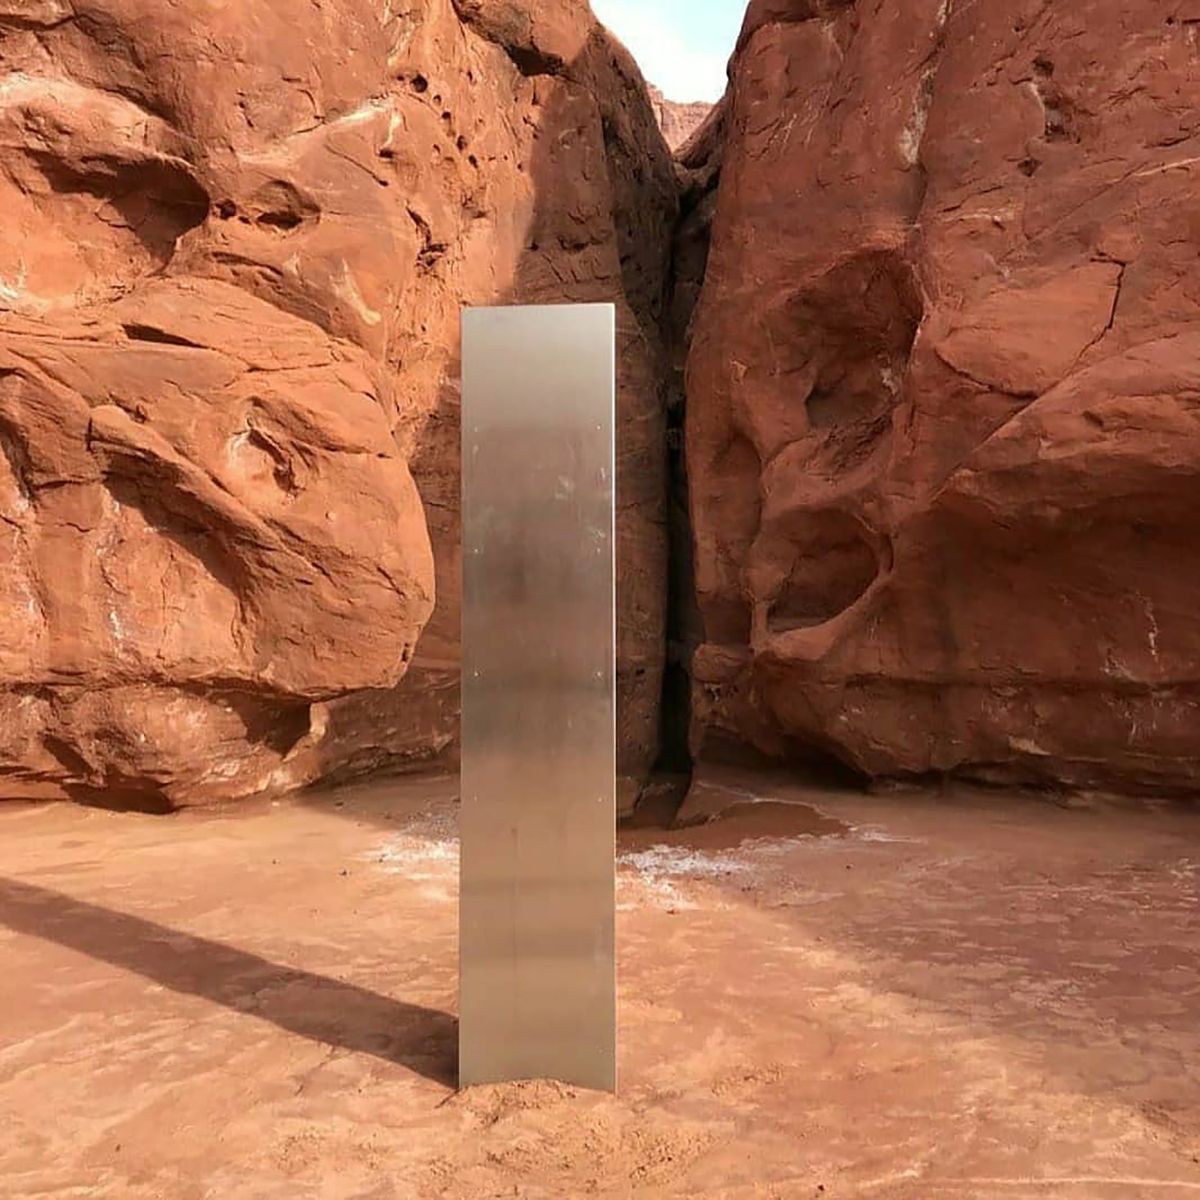 A metal monolith seen Nov. 18 in the ground in a remote area of red rock in Utah.  (HOGP)